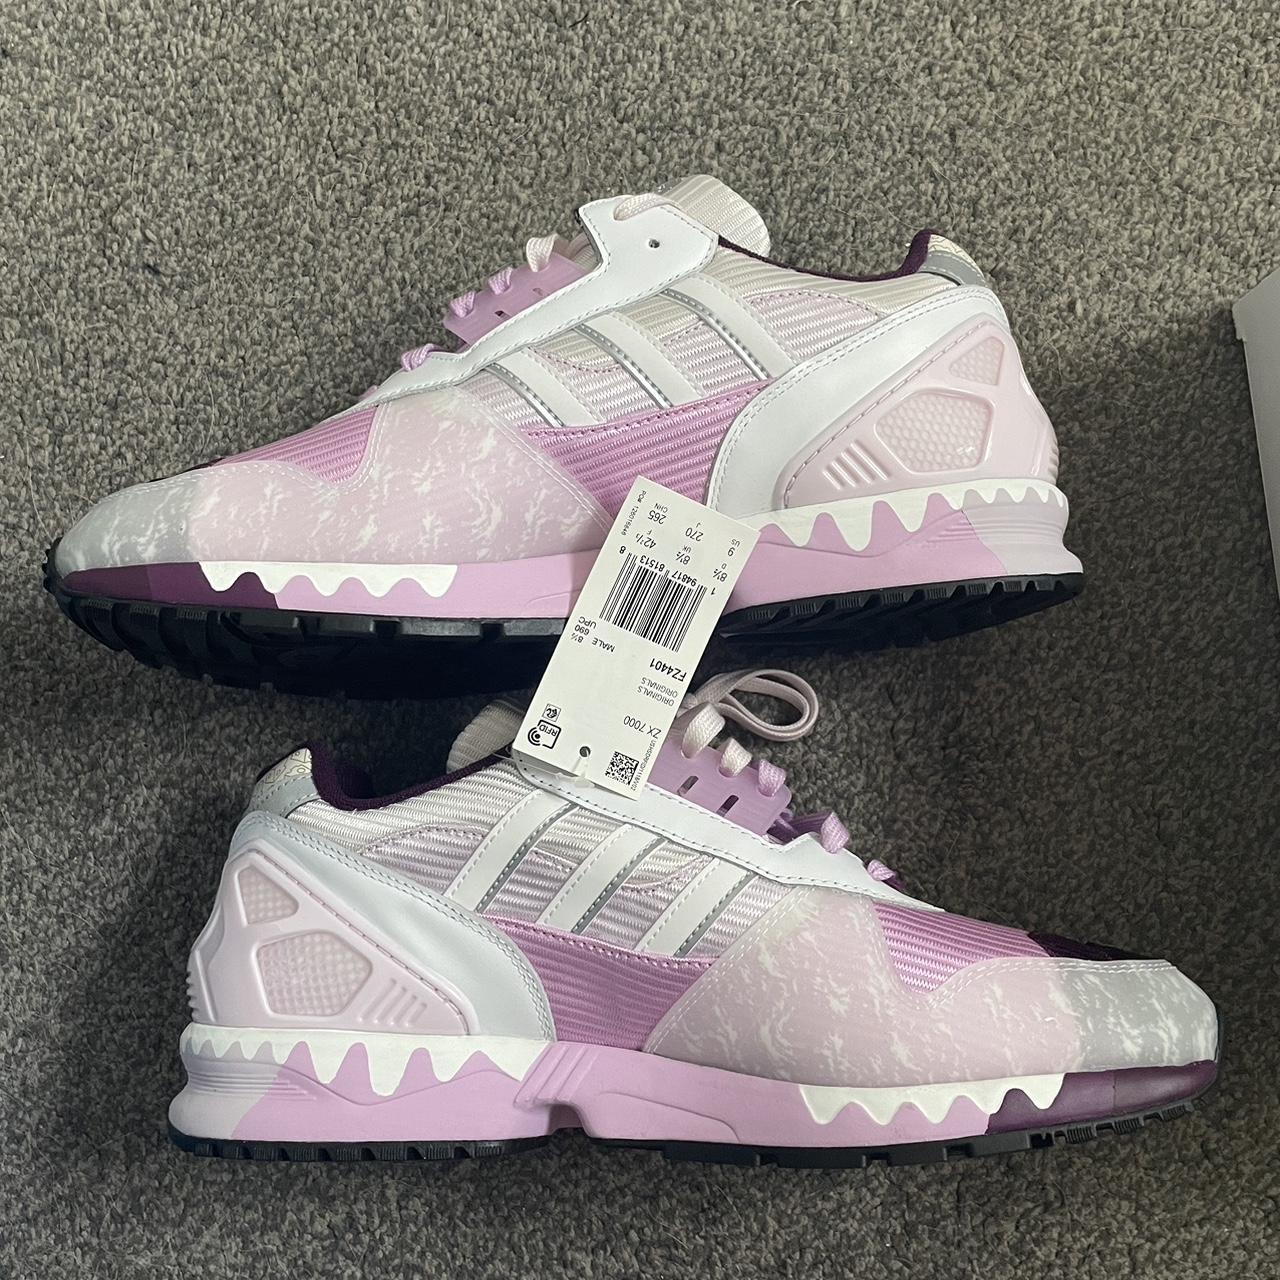 Adidas zx 7000 x Hey Tea , Very cool and rare shoes